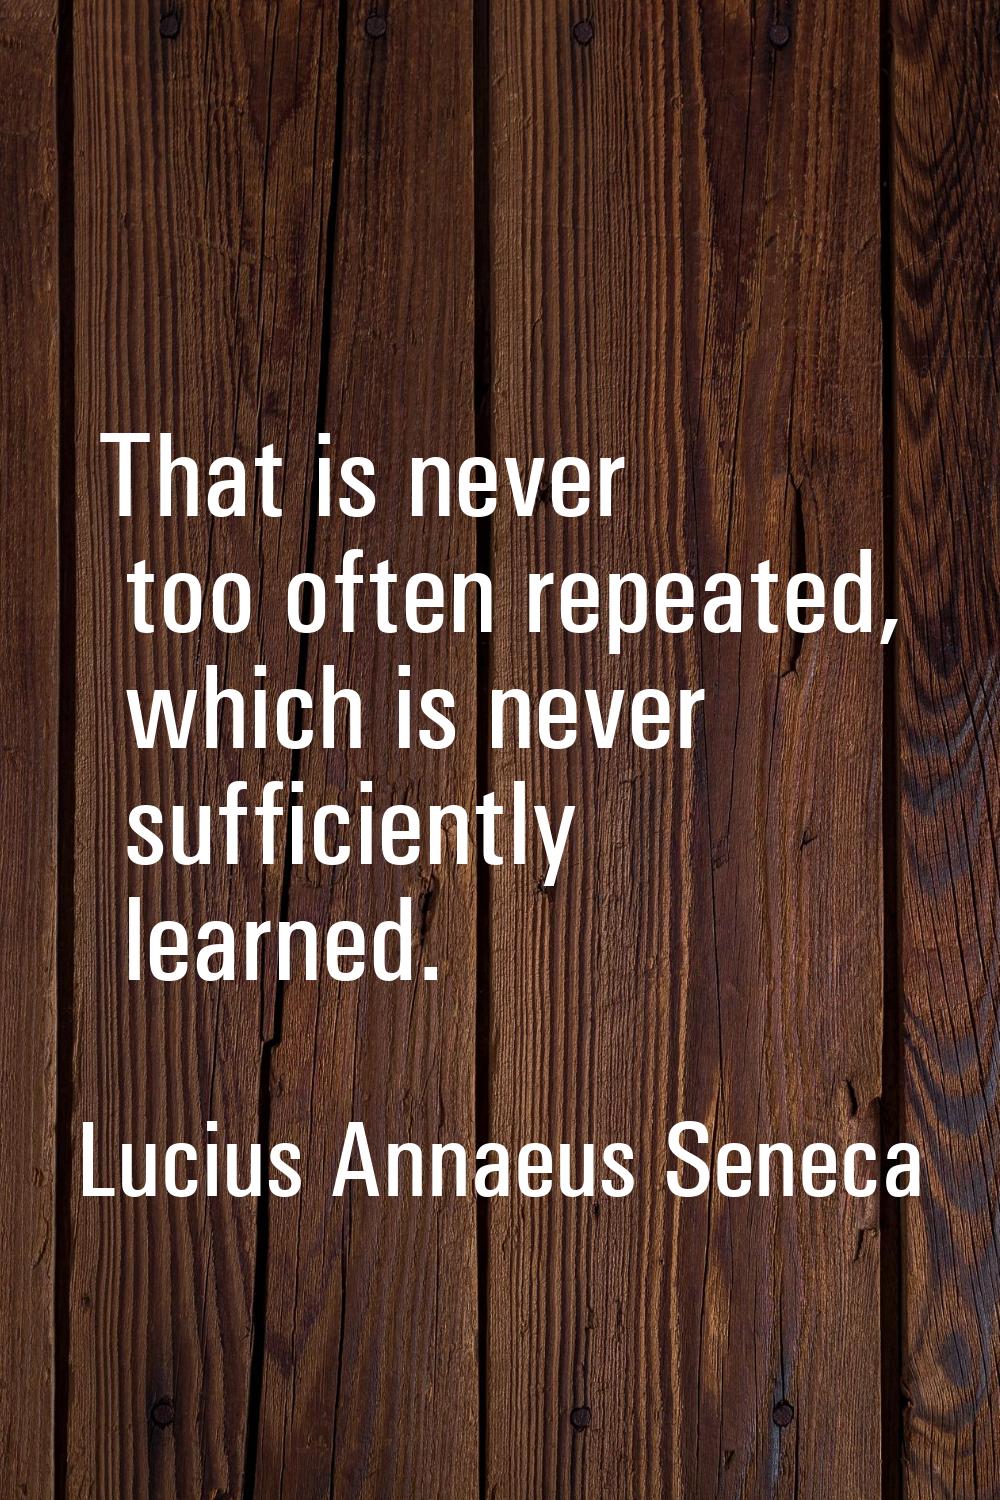 That is never too often repeated, which is never sufficiently learned.